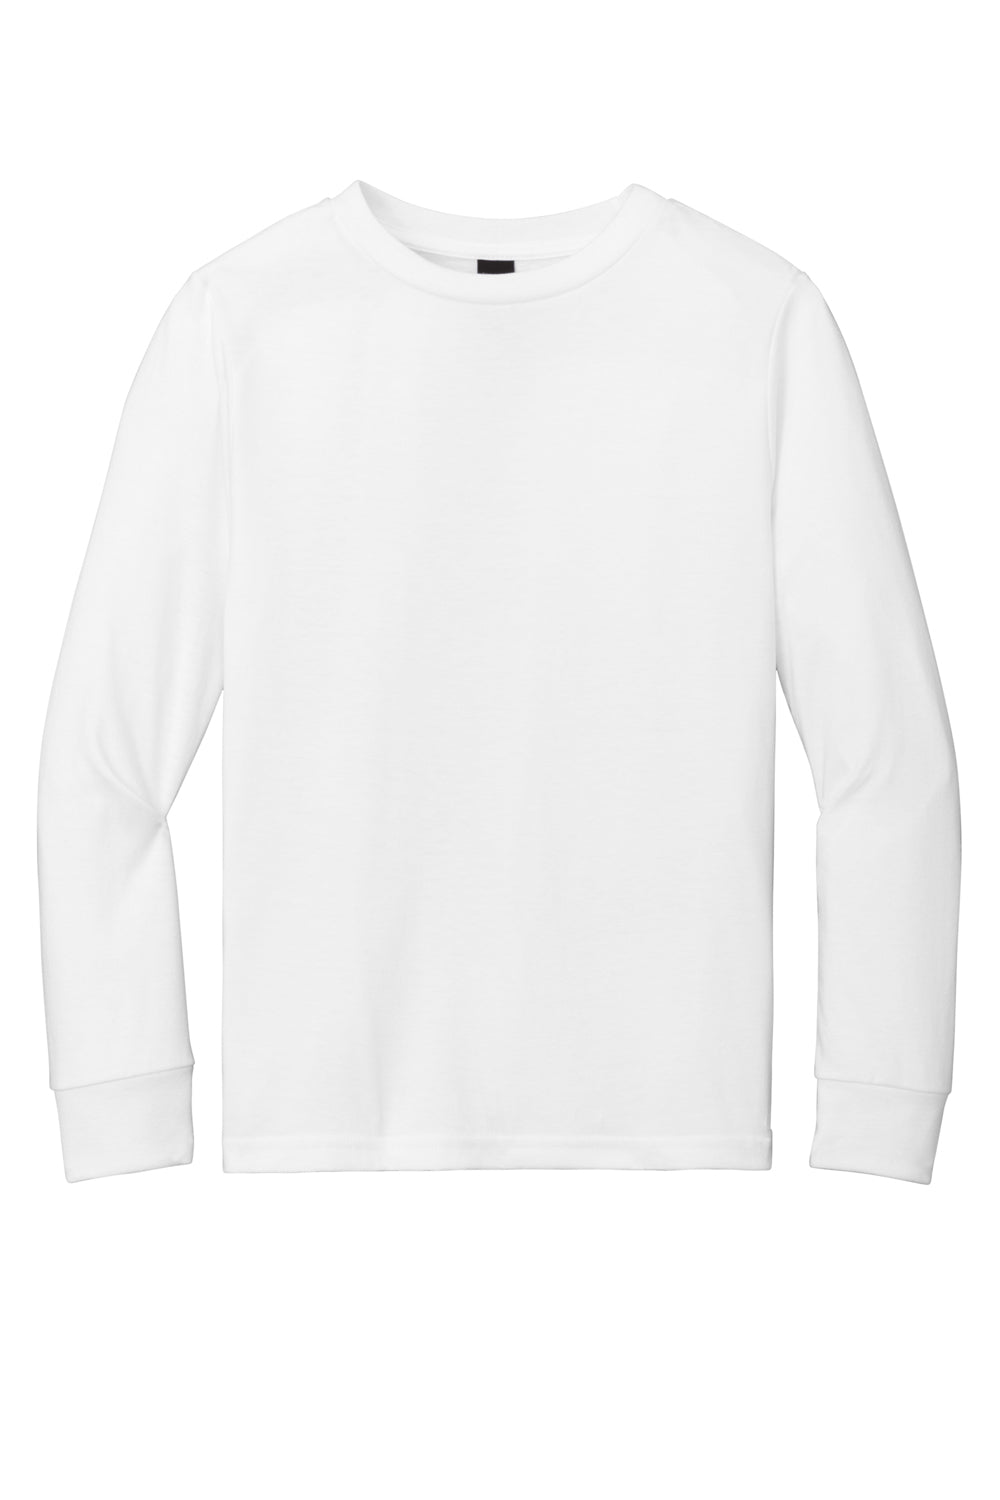 District Youth Perfect Tri Long Sleeve Crewneck T-Shirt White Flat Front